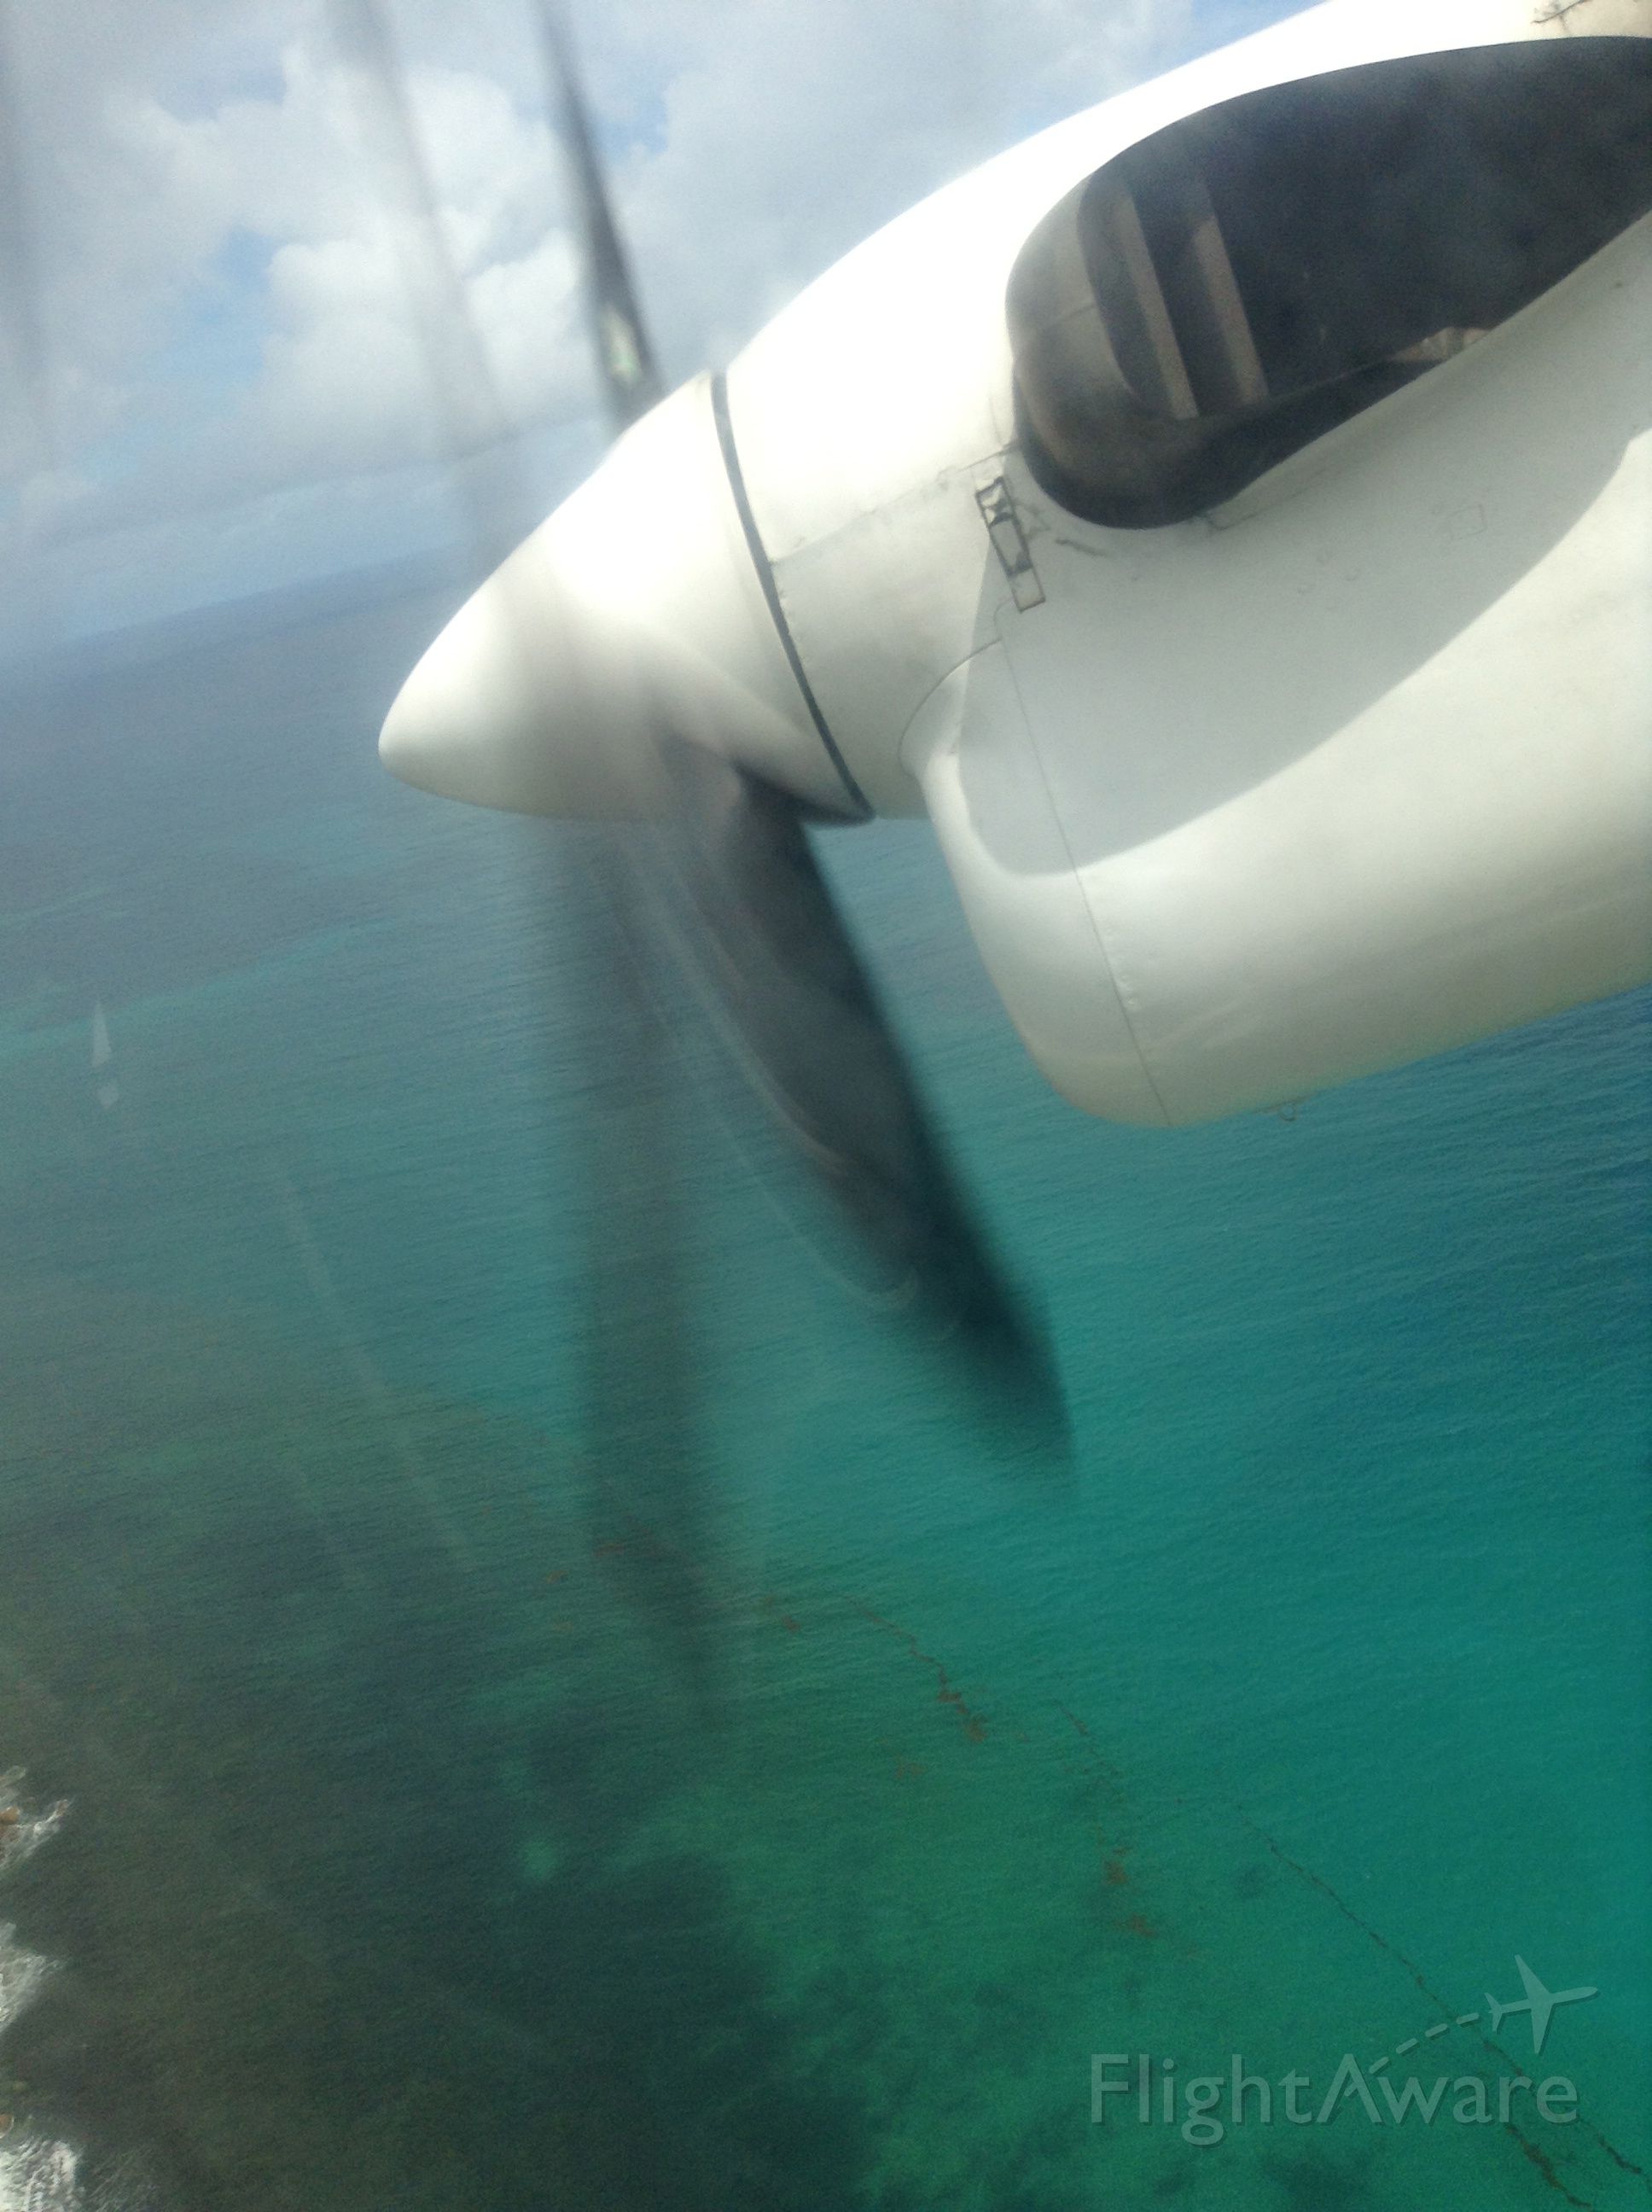 — — - Coming in the engine of the Twin Otter purrs as she approaches the airfield at Praslin Island